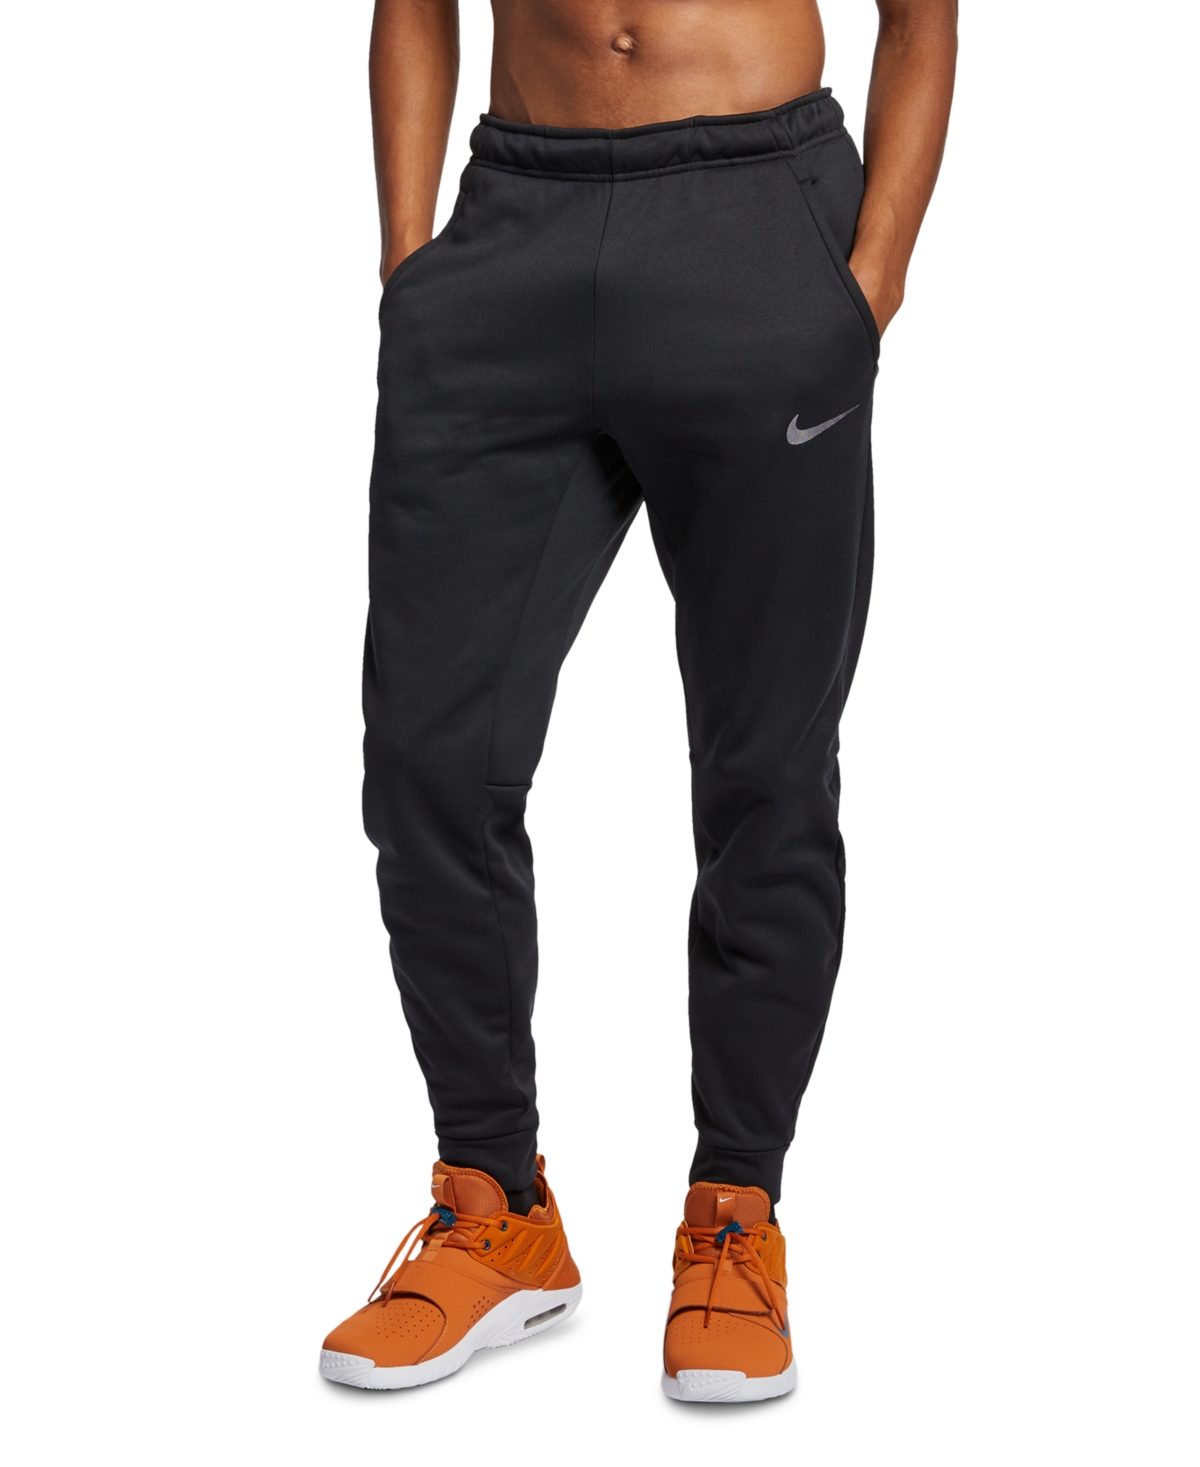 UPC 886668336152 product image for Nike Men's Therma Tapered Training Pants | upcitemdb.com